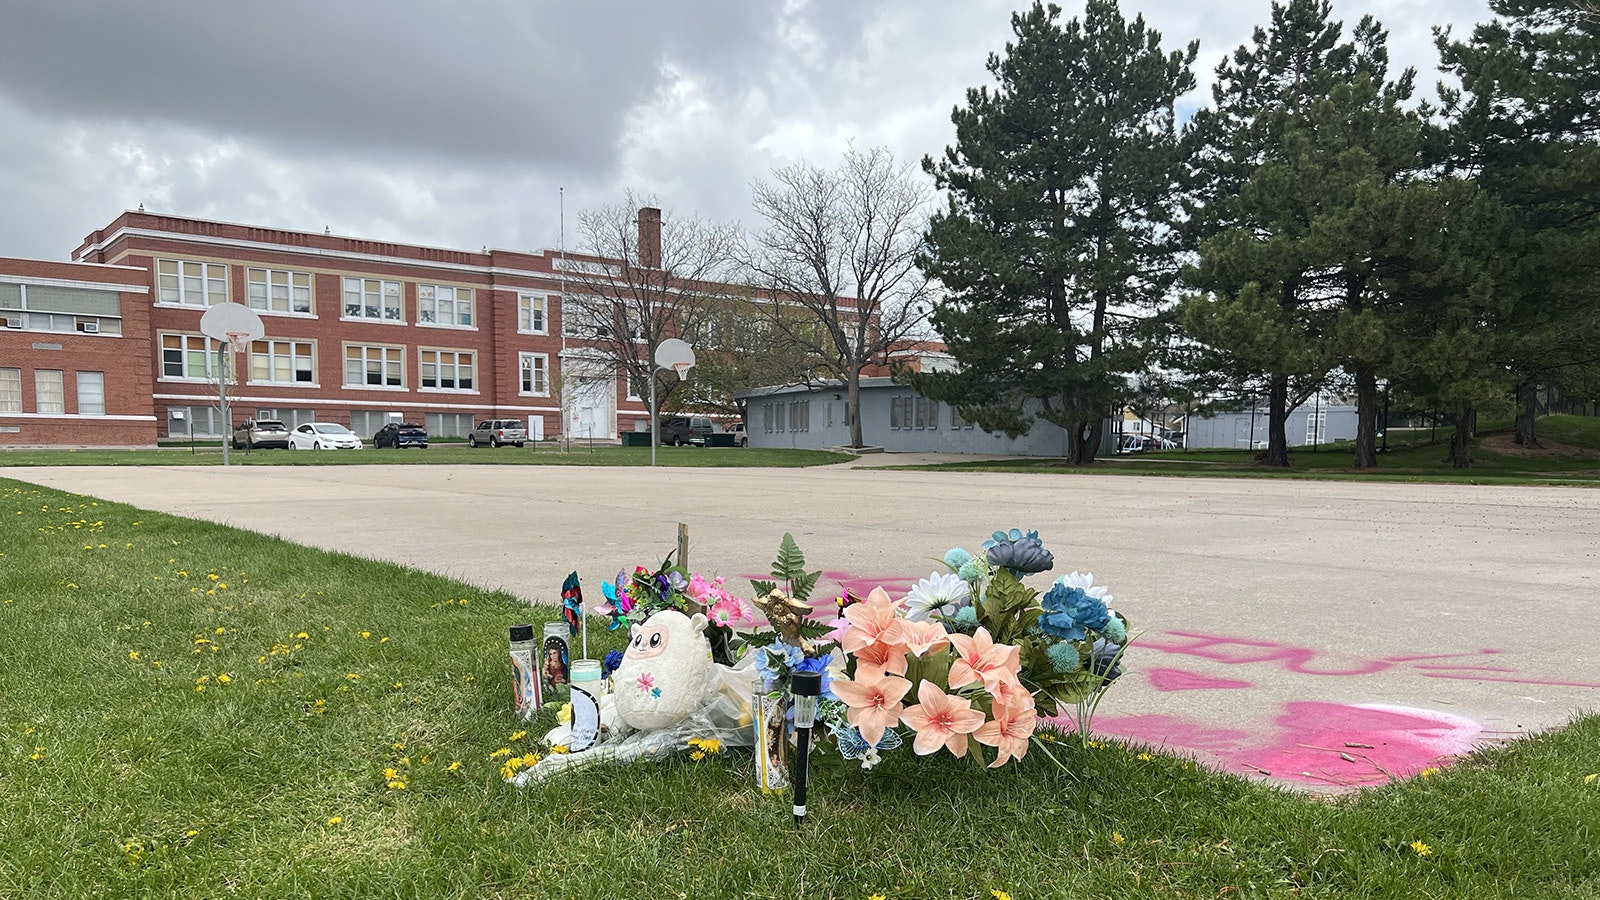 A memorial for a 15-year-old girl shot and killed in a drive-by at Lincoln Park in Cheyenne. Two teens have been charged as adults in the killing.